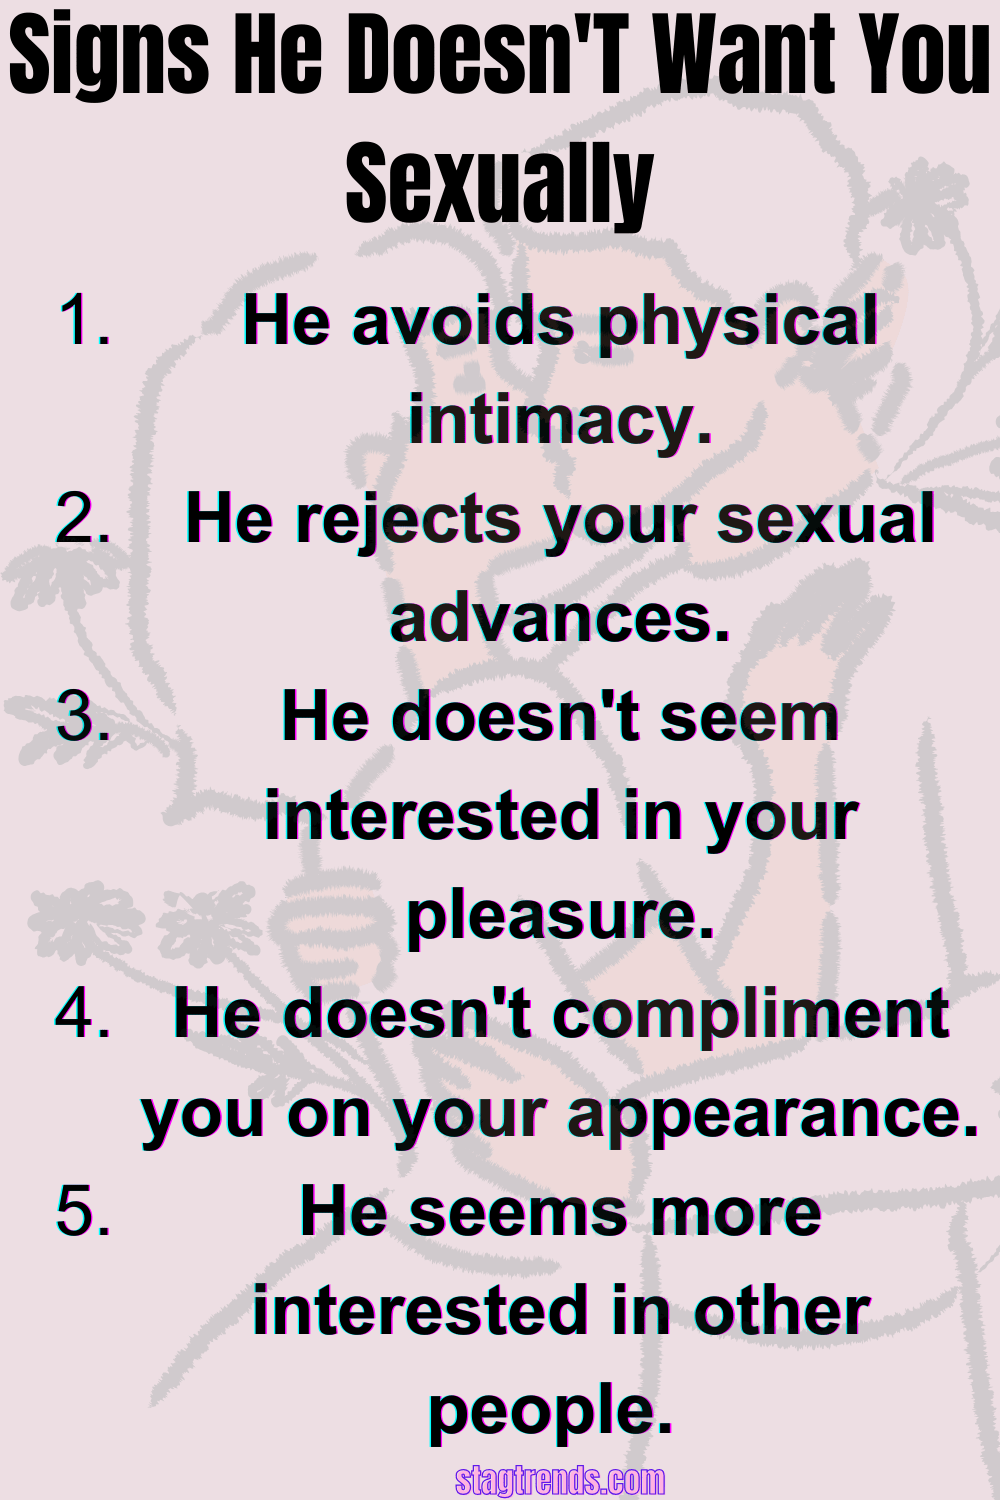 Signs He DoesnT Want You Sexually 